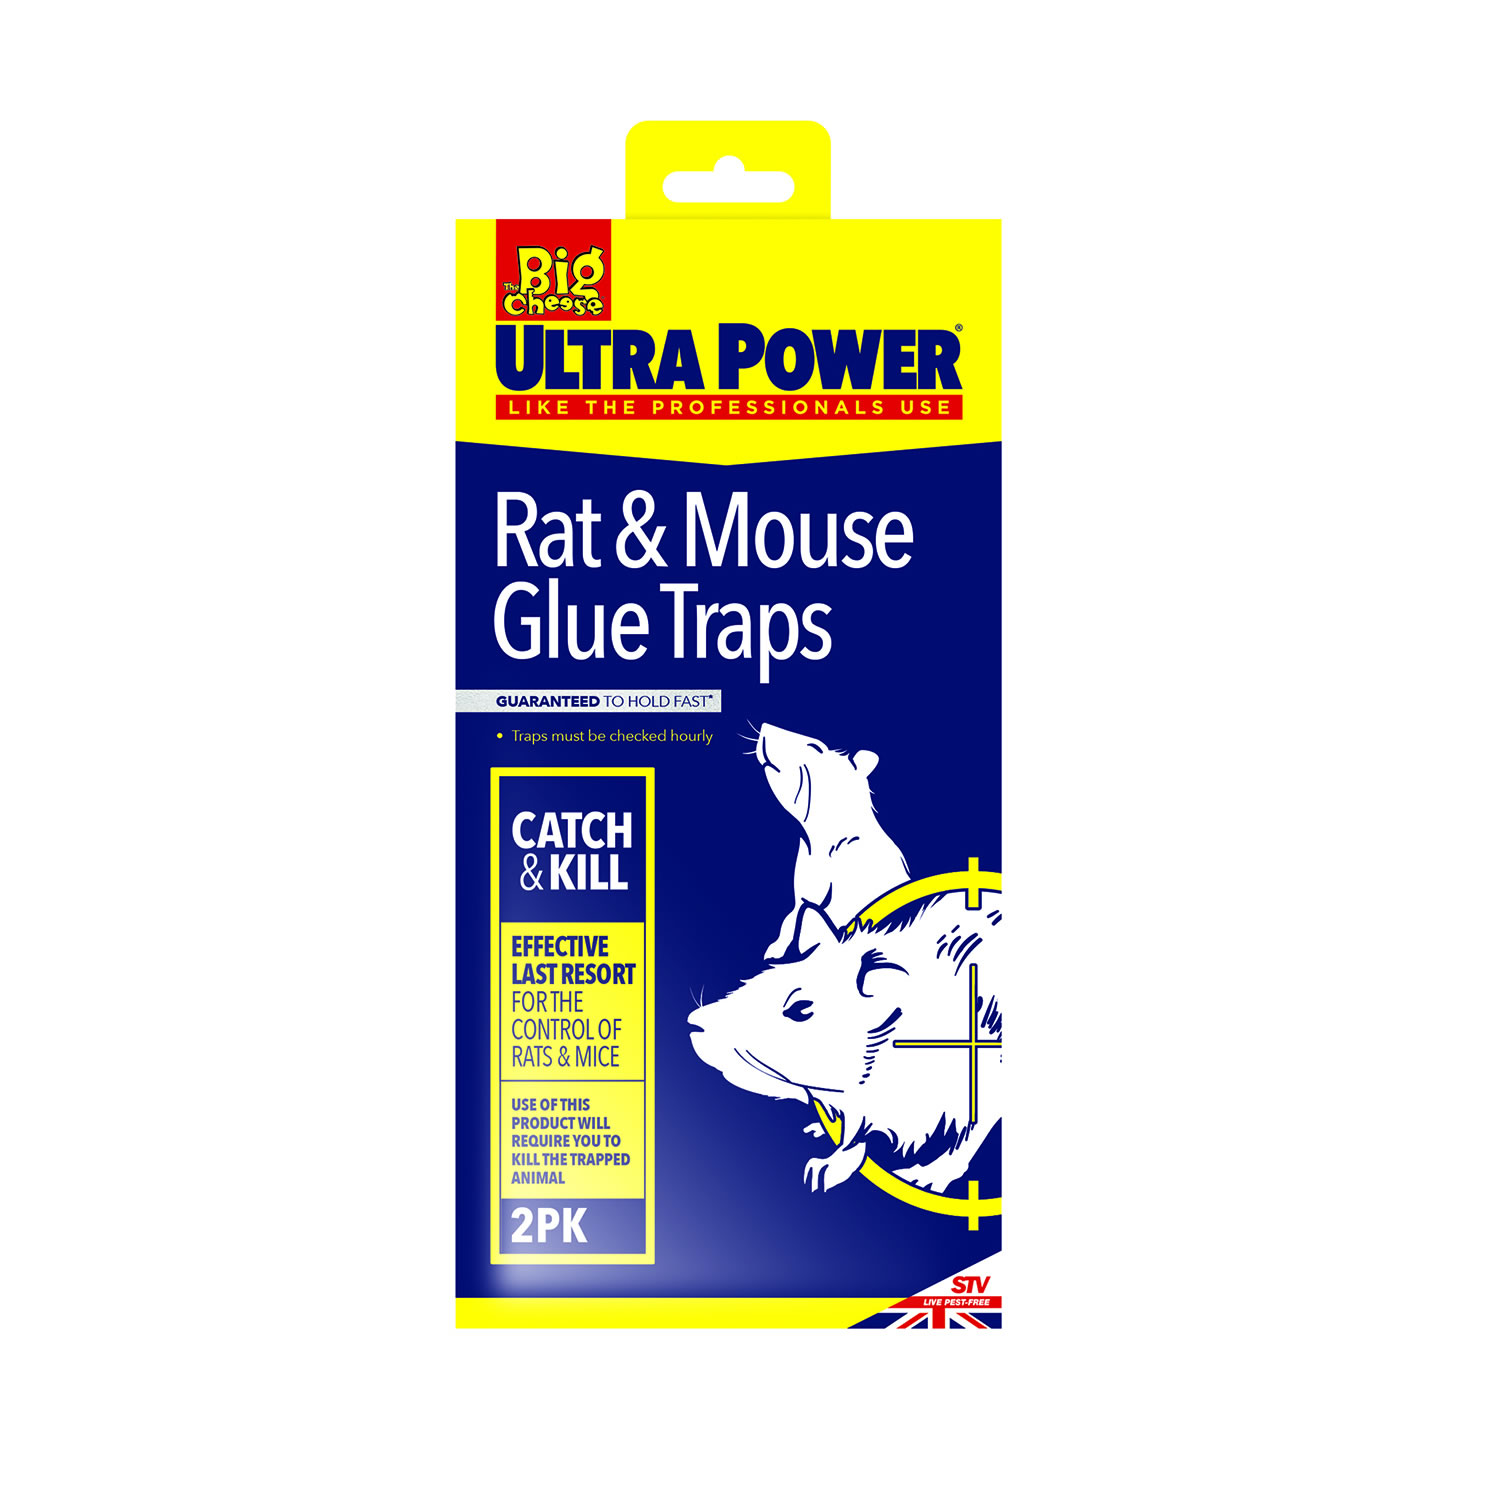 THE BIG CHEESE ULTRA POWER RAT & MOUSE GLUE TRAP TWIN PACK